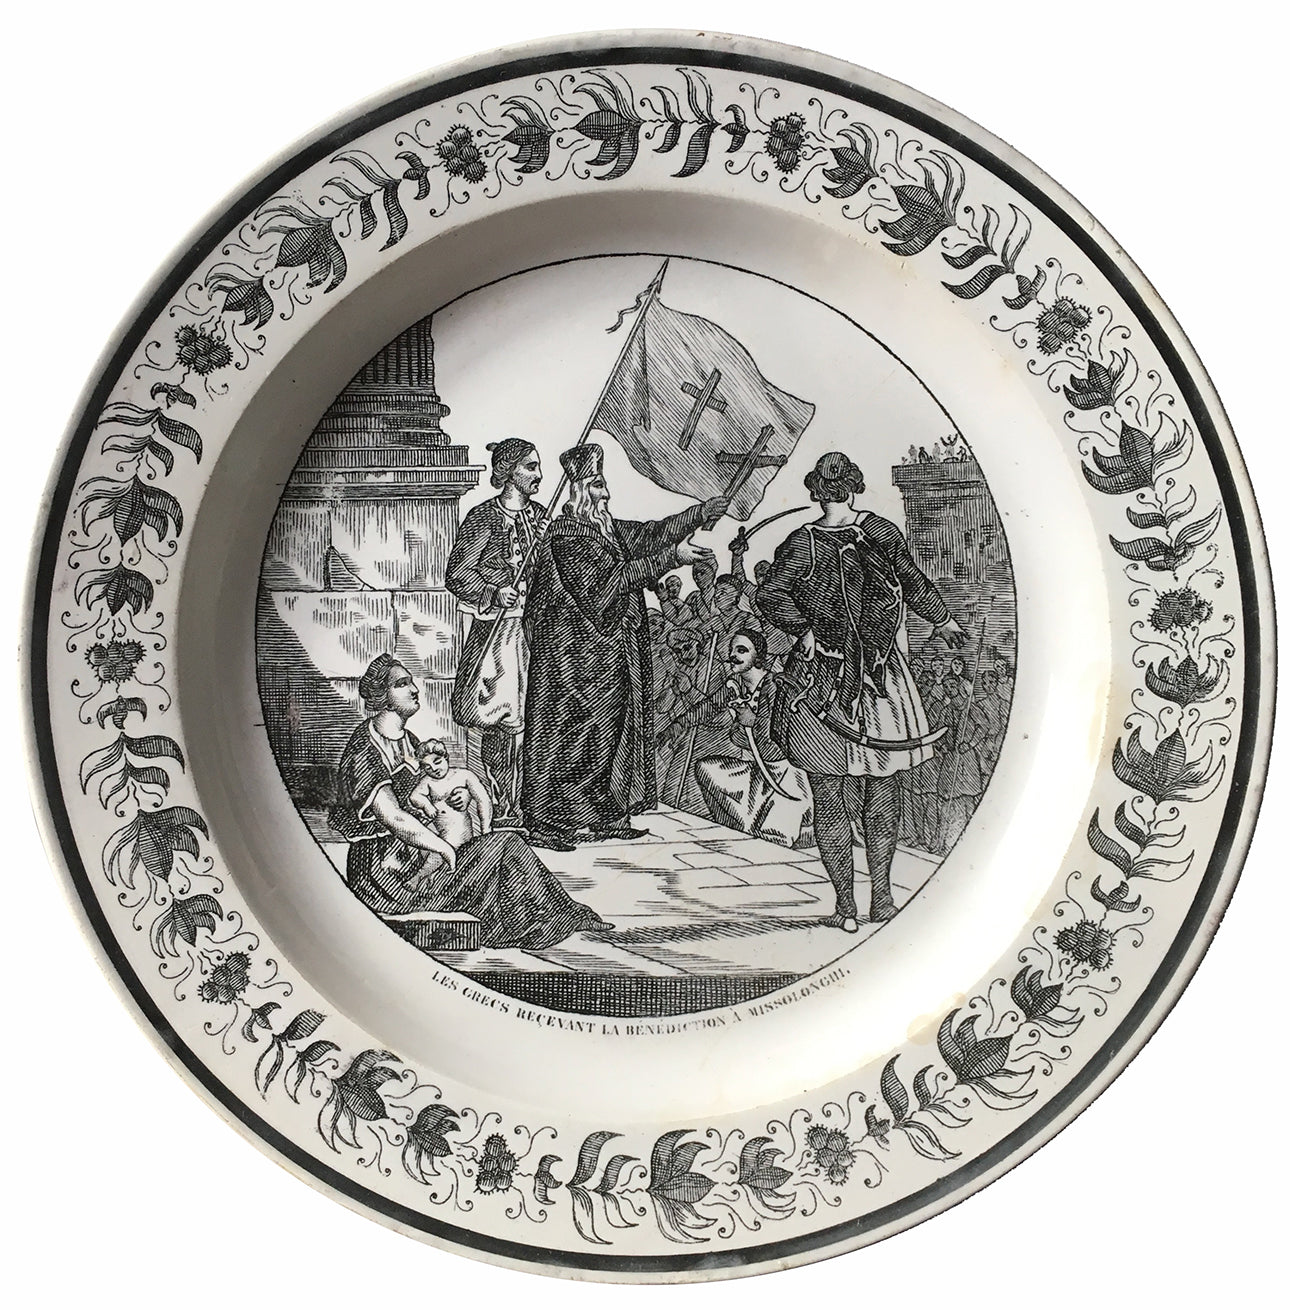 SOLD French Montereau Creamware Plate, Transfer-Printed with Benediction at Missolonghi